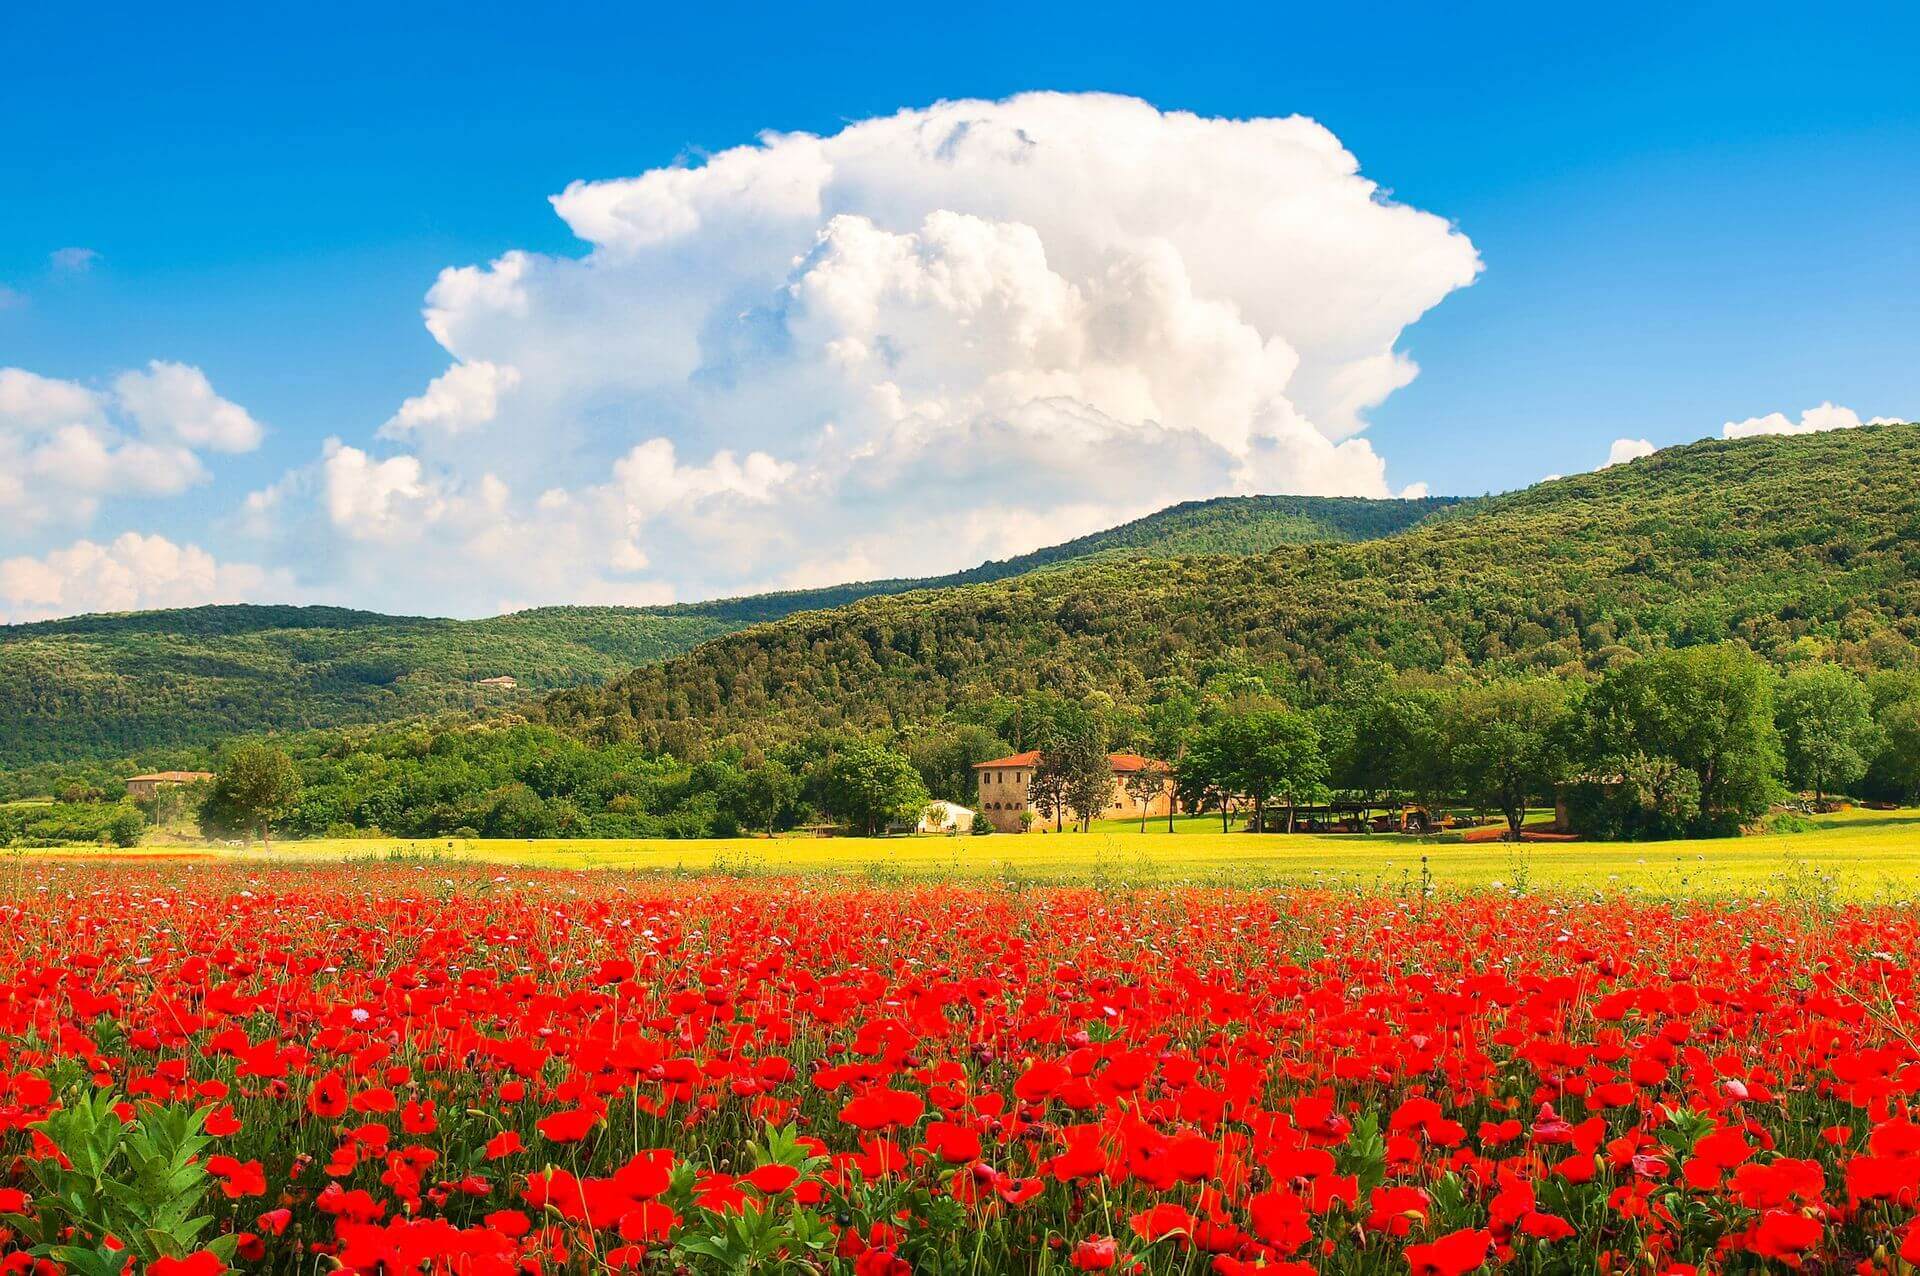 Beautiful landscape with field of red poppy flowers and traditional farm house in Monteriggioni Tuscany Italy